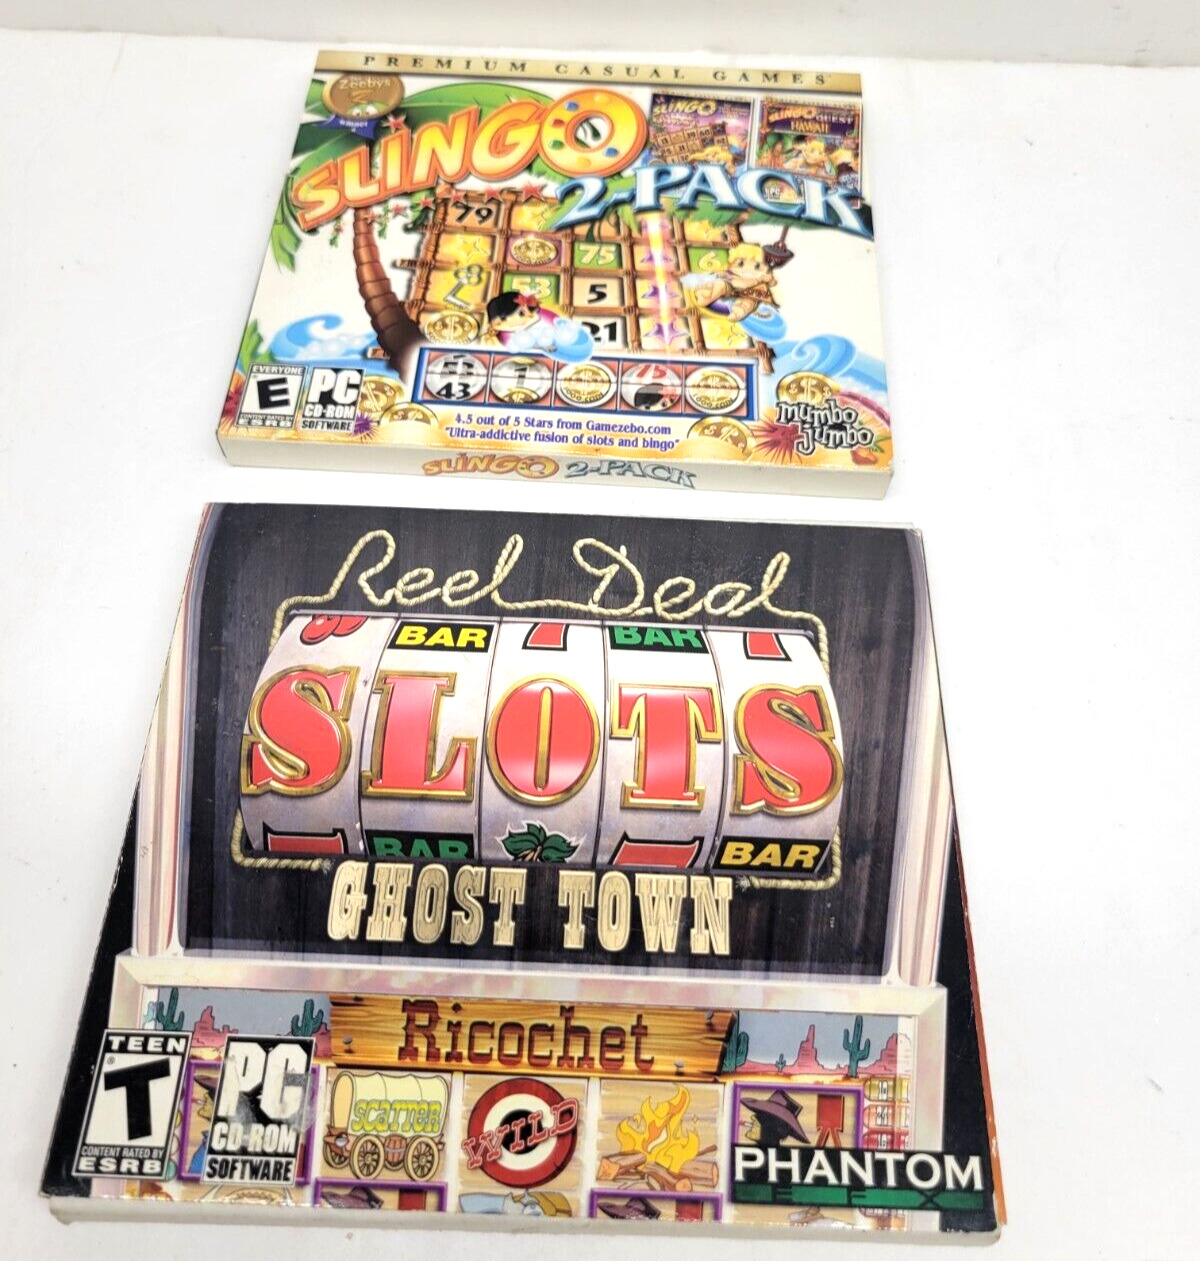 2 PC CD-ROM REEL DEAL SLOTS GHOST TOWN & SLINGO - READ CONDITION - U